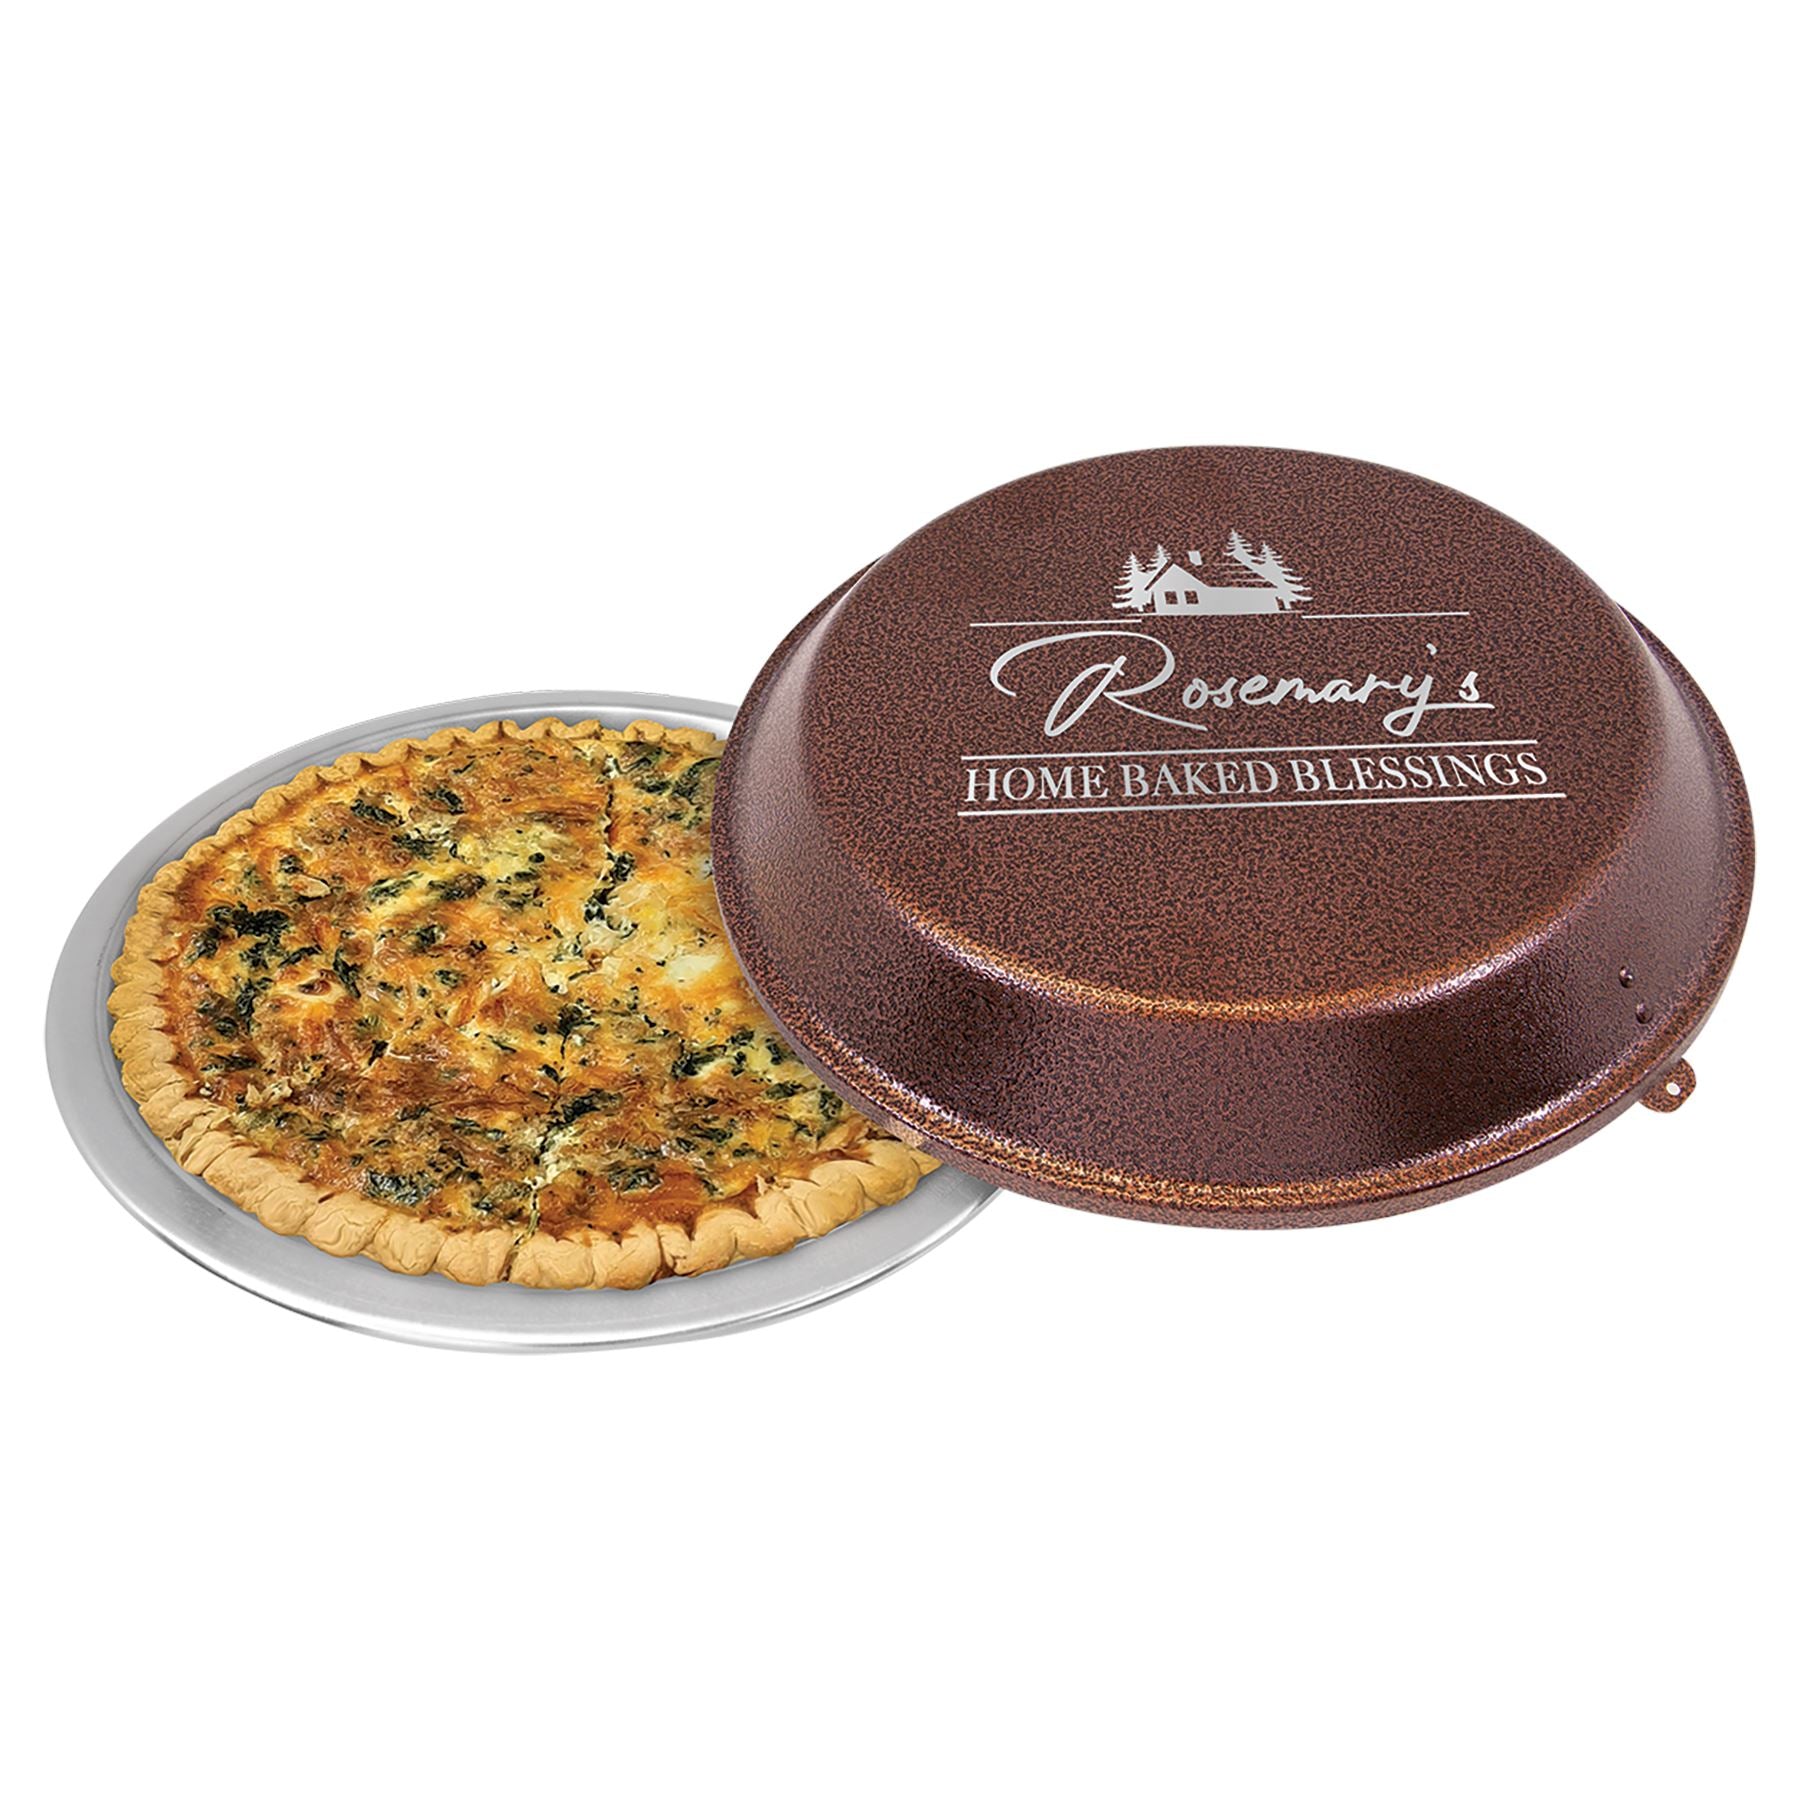 Cake Pan with Engraved Design on Copper Colored Lid - Aluminum 9